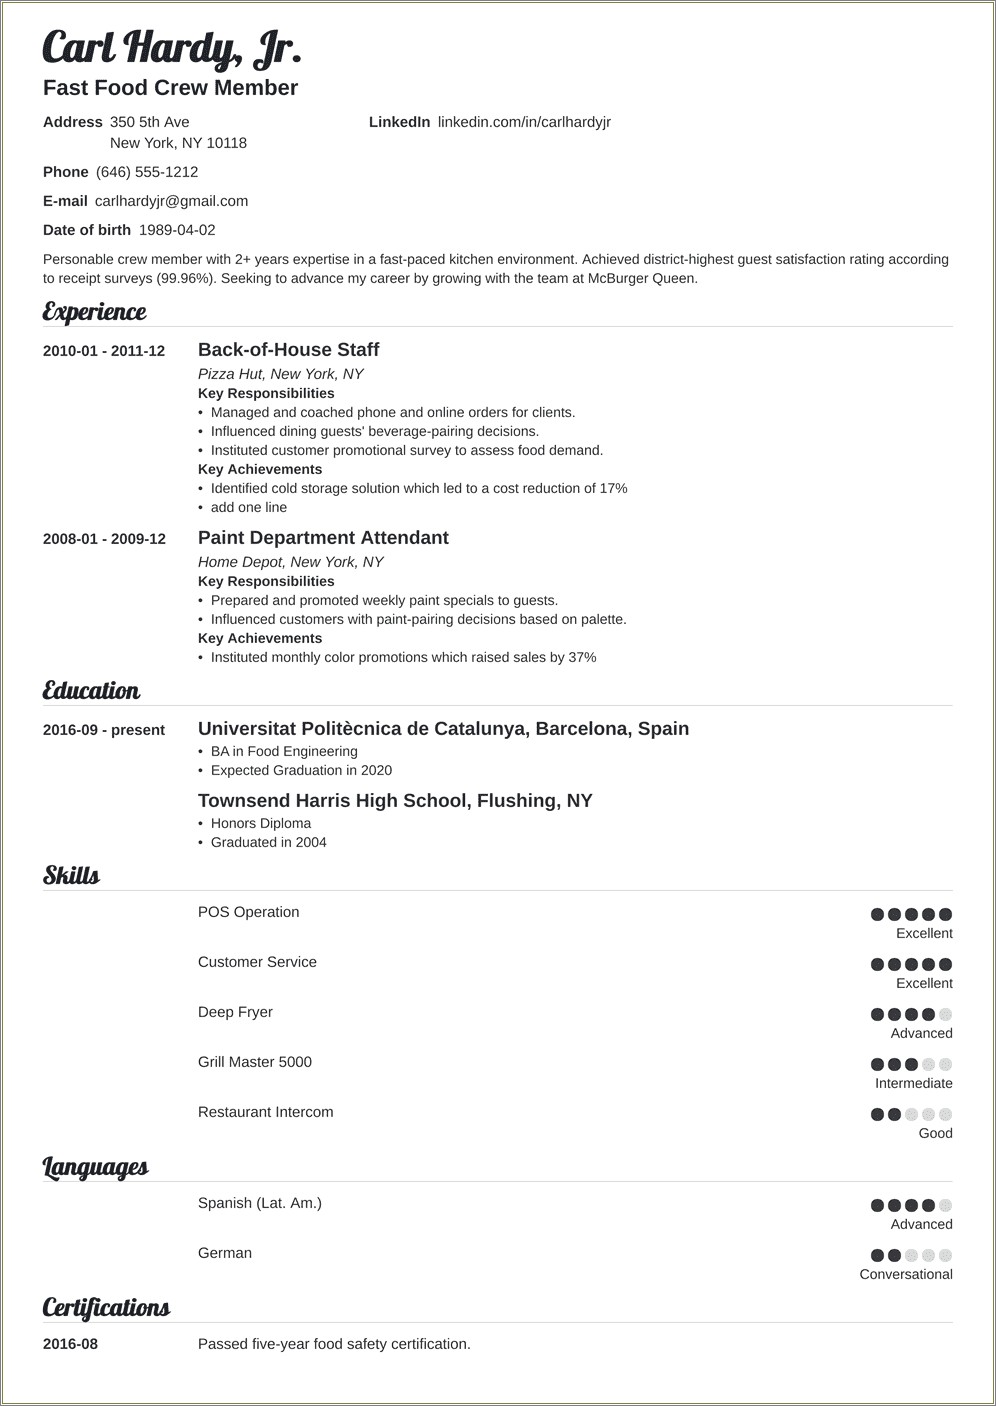 Name For Fast Food Worker For Resume